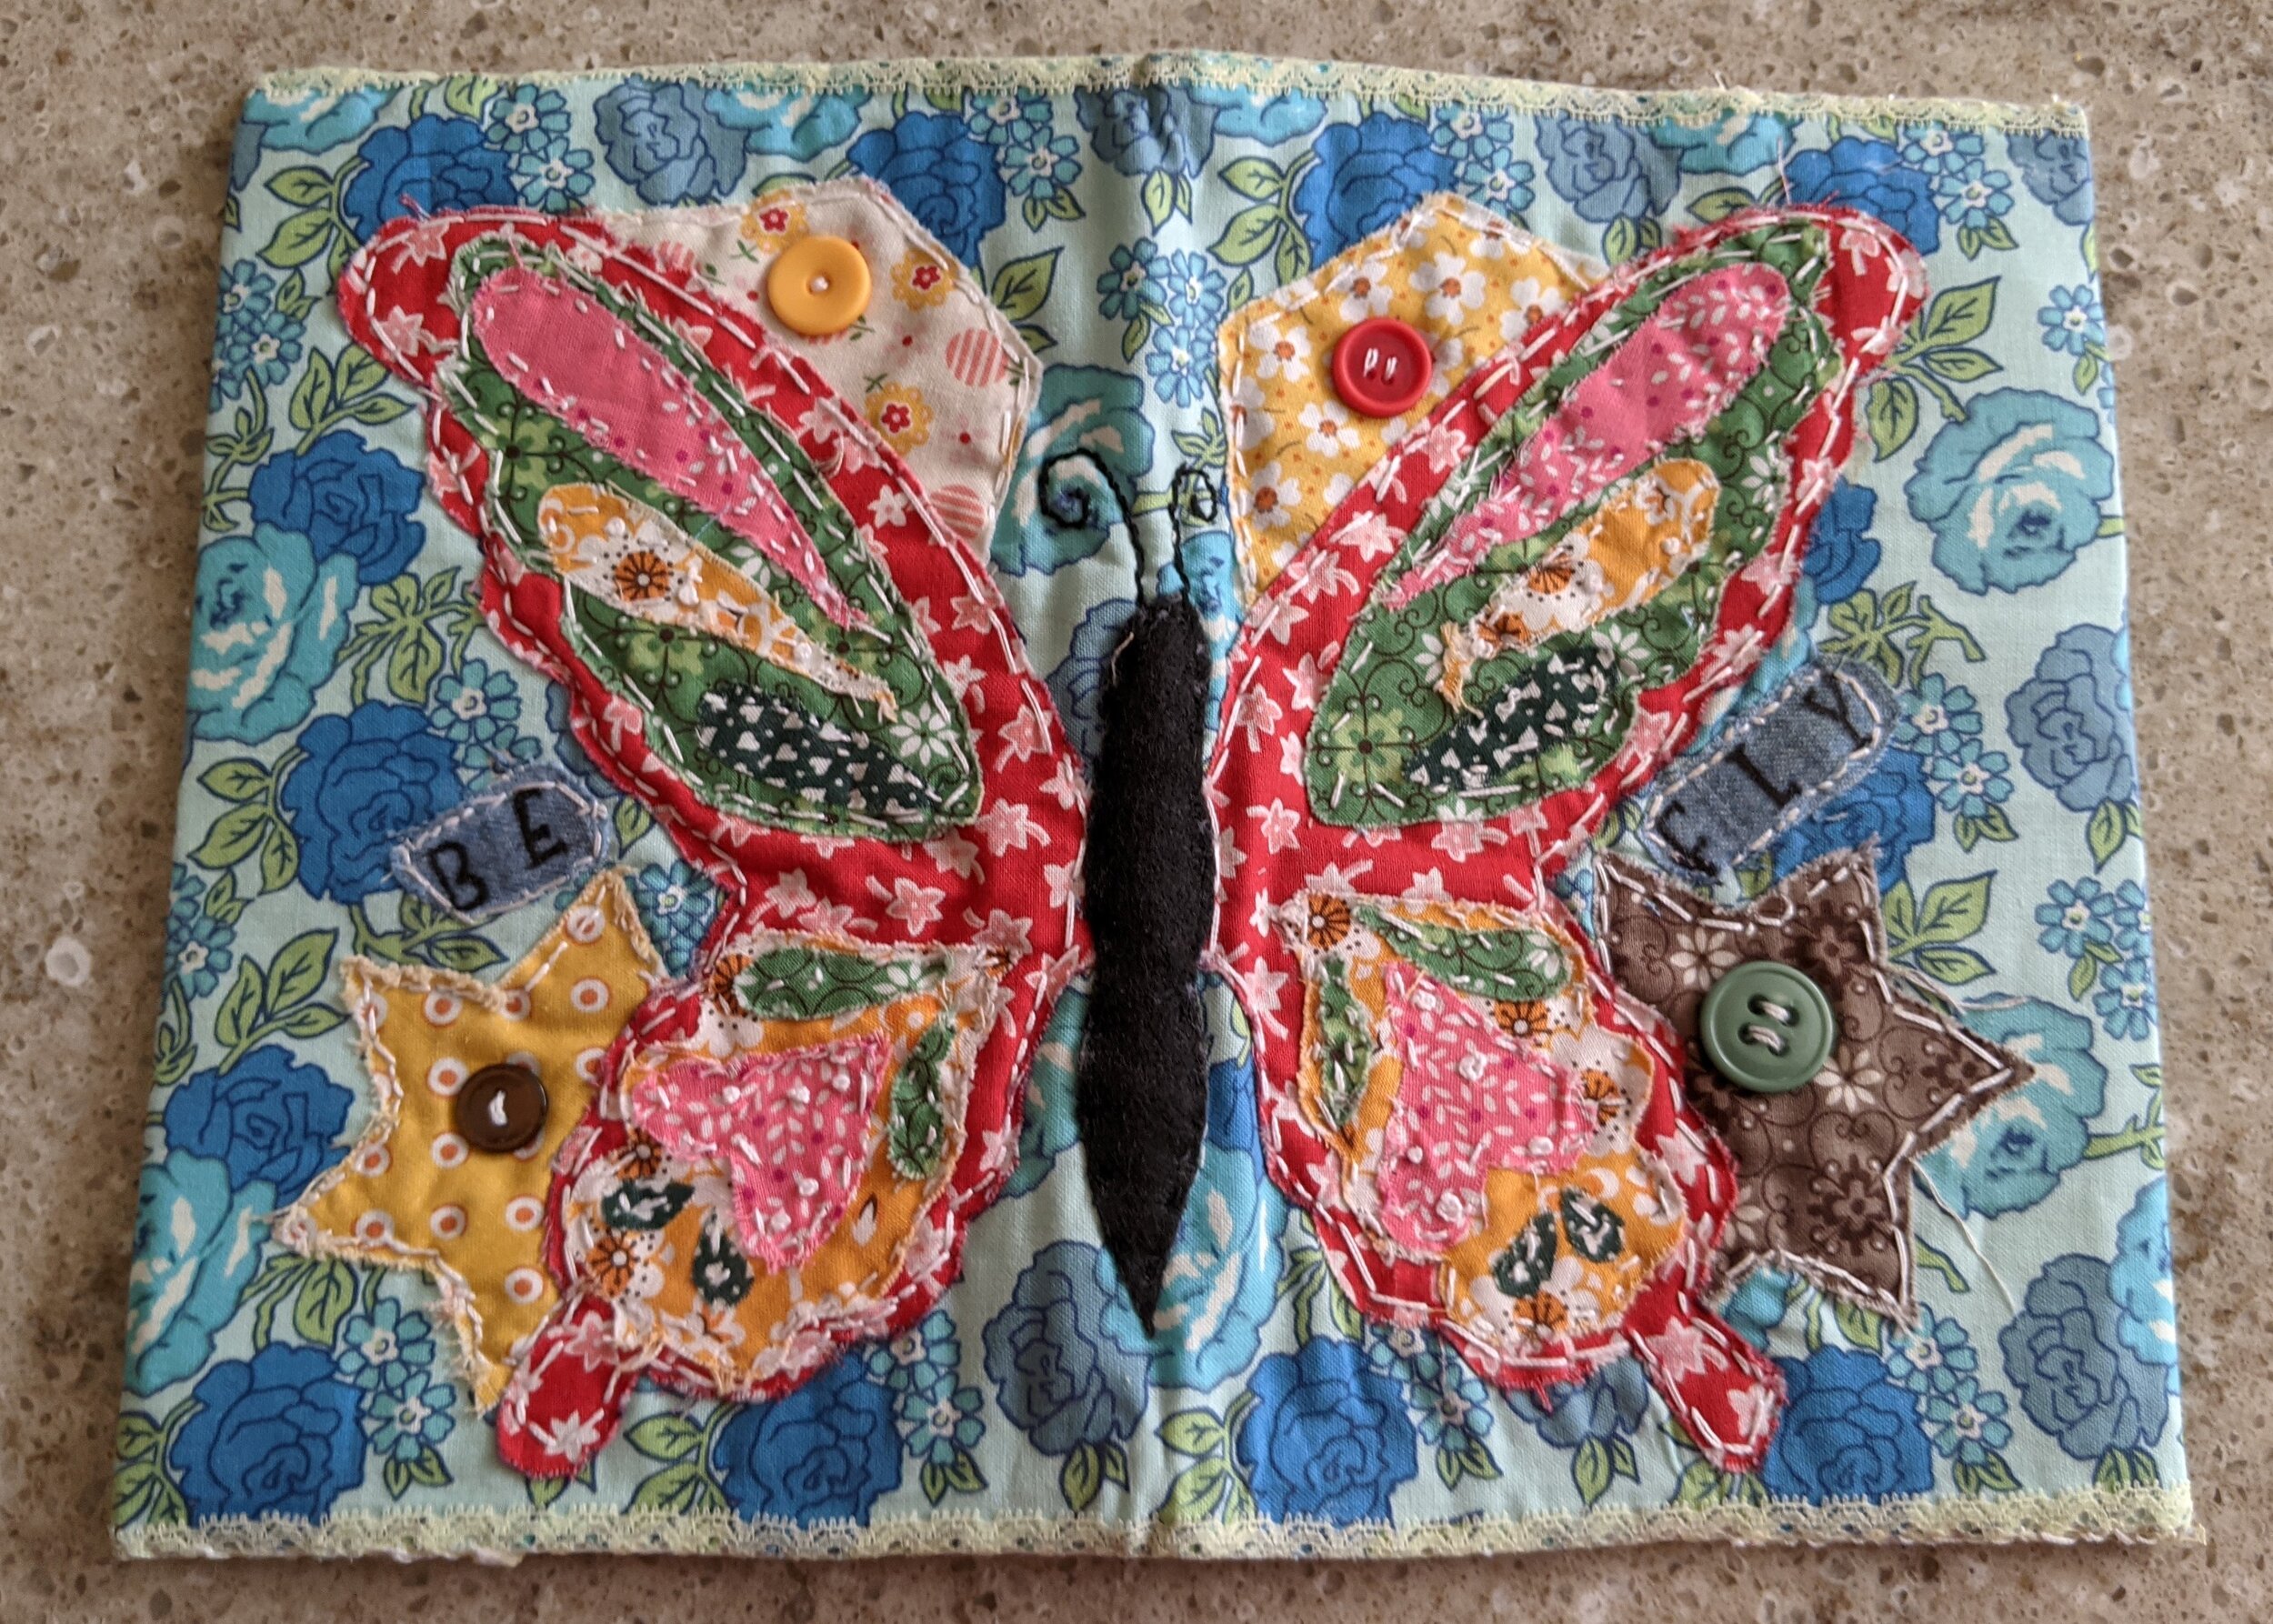 Transformation butterfly completed 2.jpg